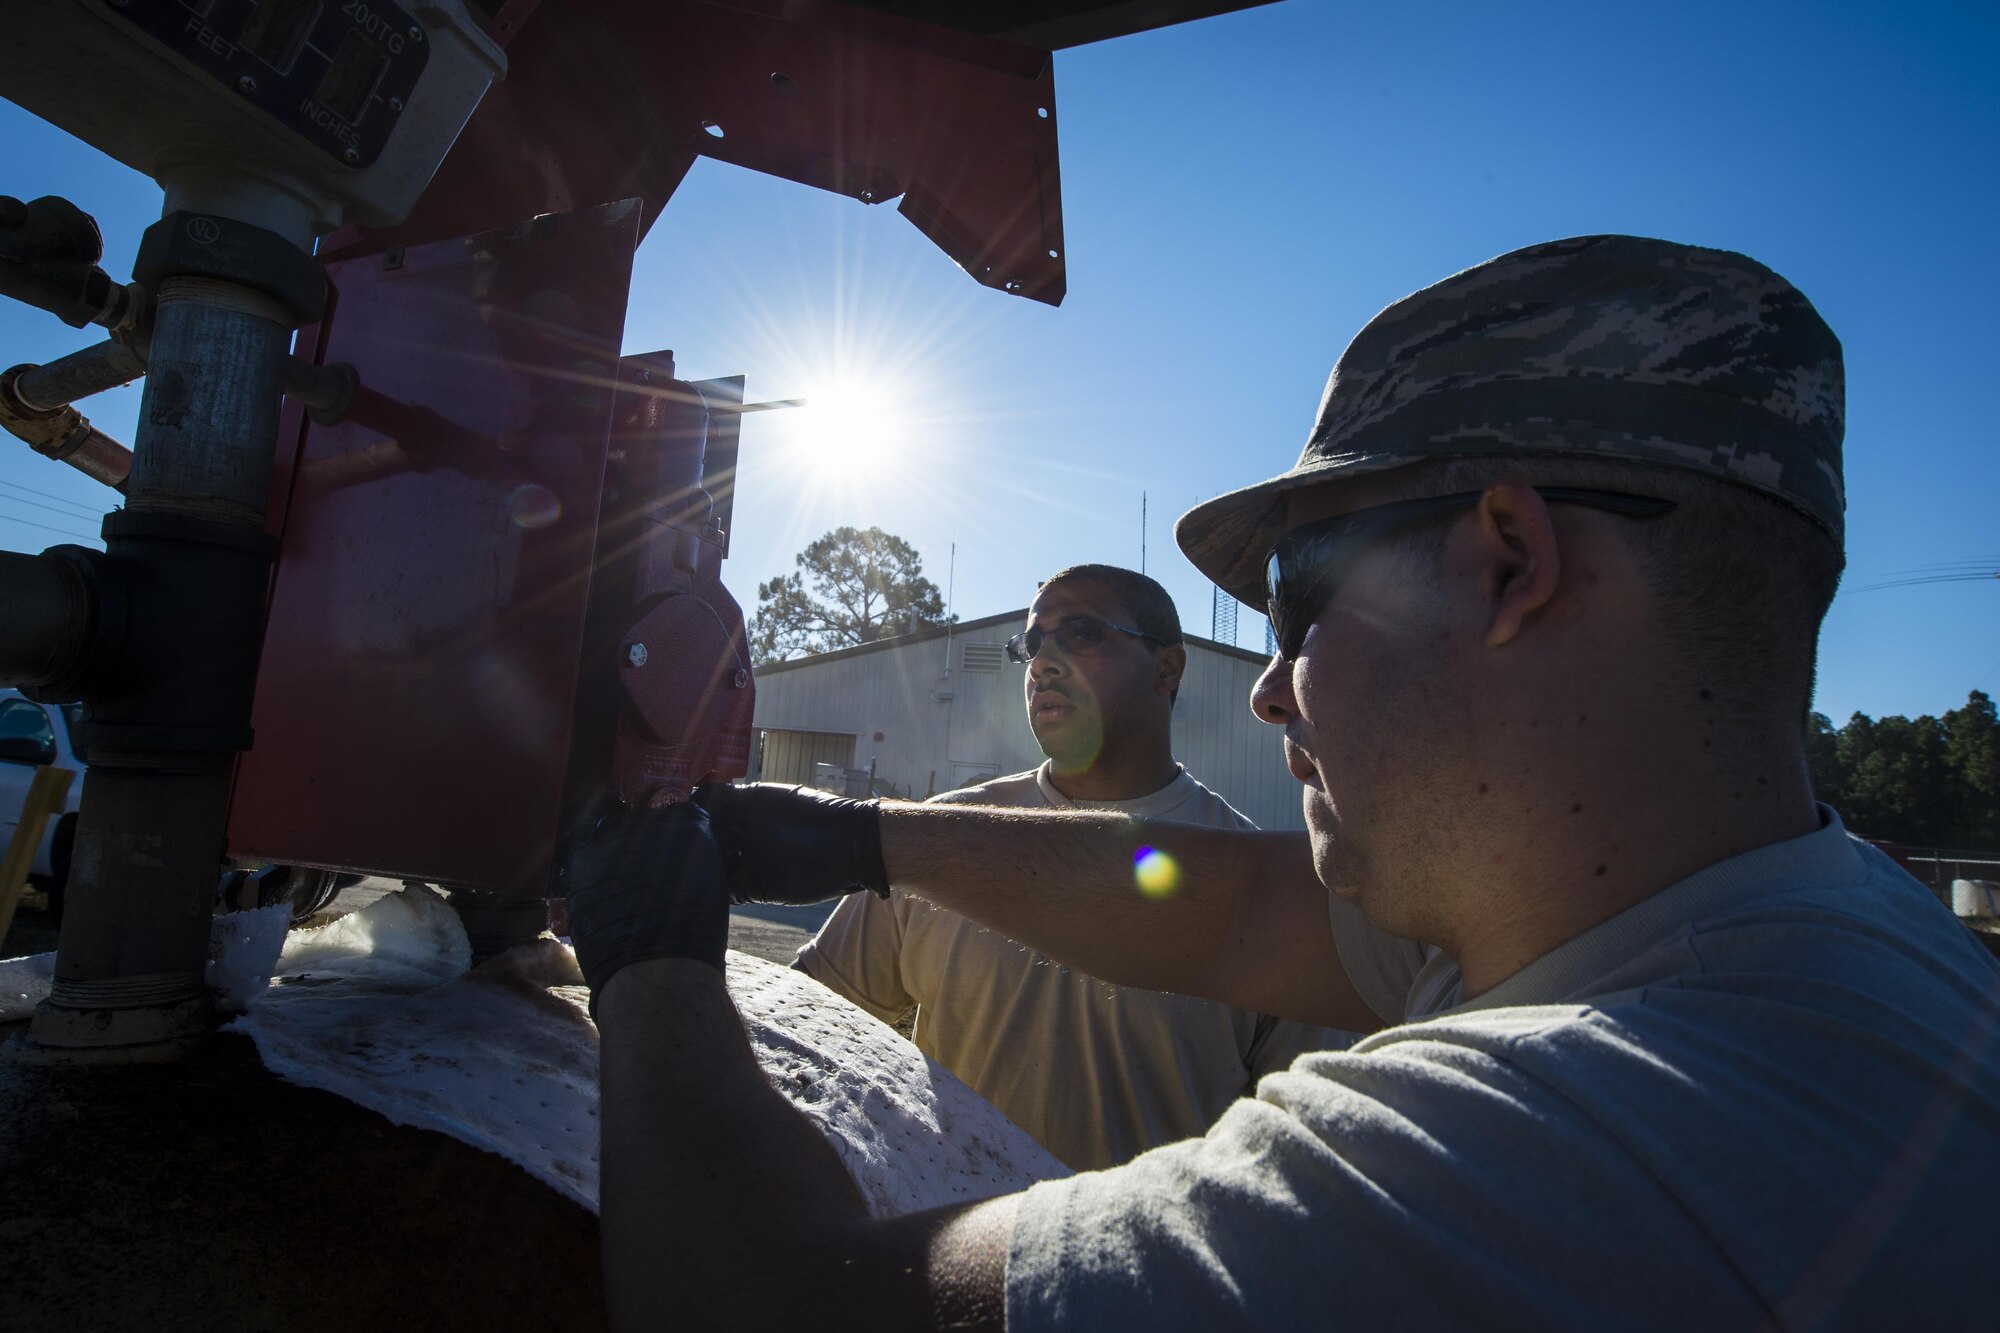 Senior Airmen Chris Coney, left, and Dacota Napolitano, water and fuels system specialists with the 1st Special Operations Civil Engineer Squadron, remove a fuel pump from a fuel tank at Hurlburt Field, Fla., Nov. 17, 2016. The 1st SOCES replaced the fuel pump with a new one. (U.S. Air Force photo by Airman 1st Class Joseph Pick)